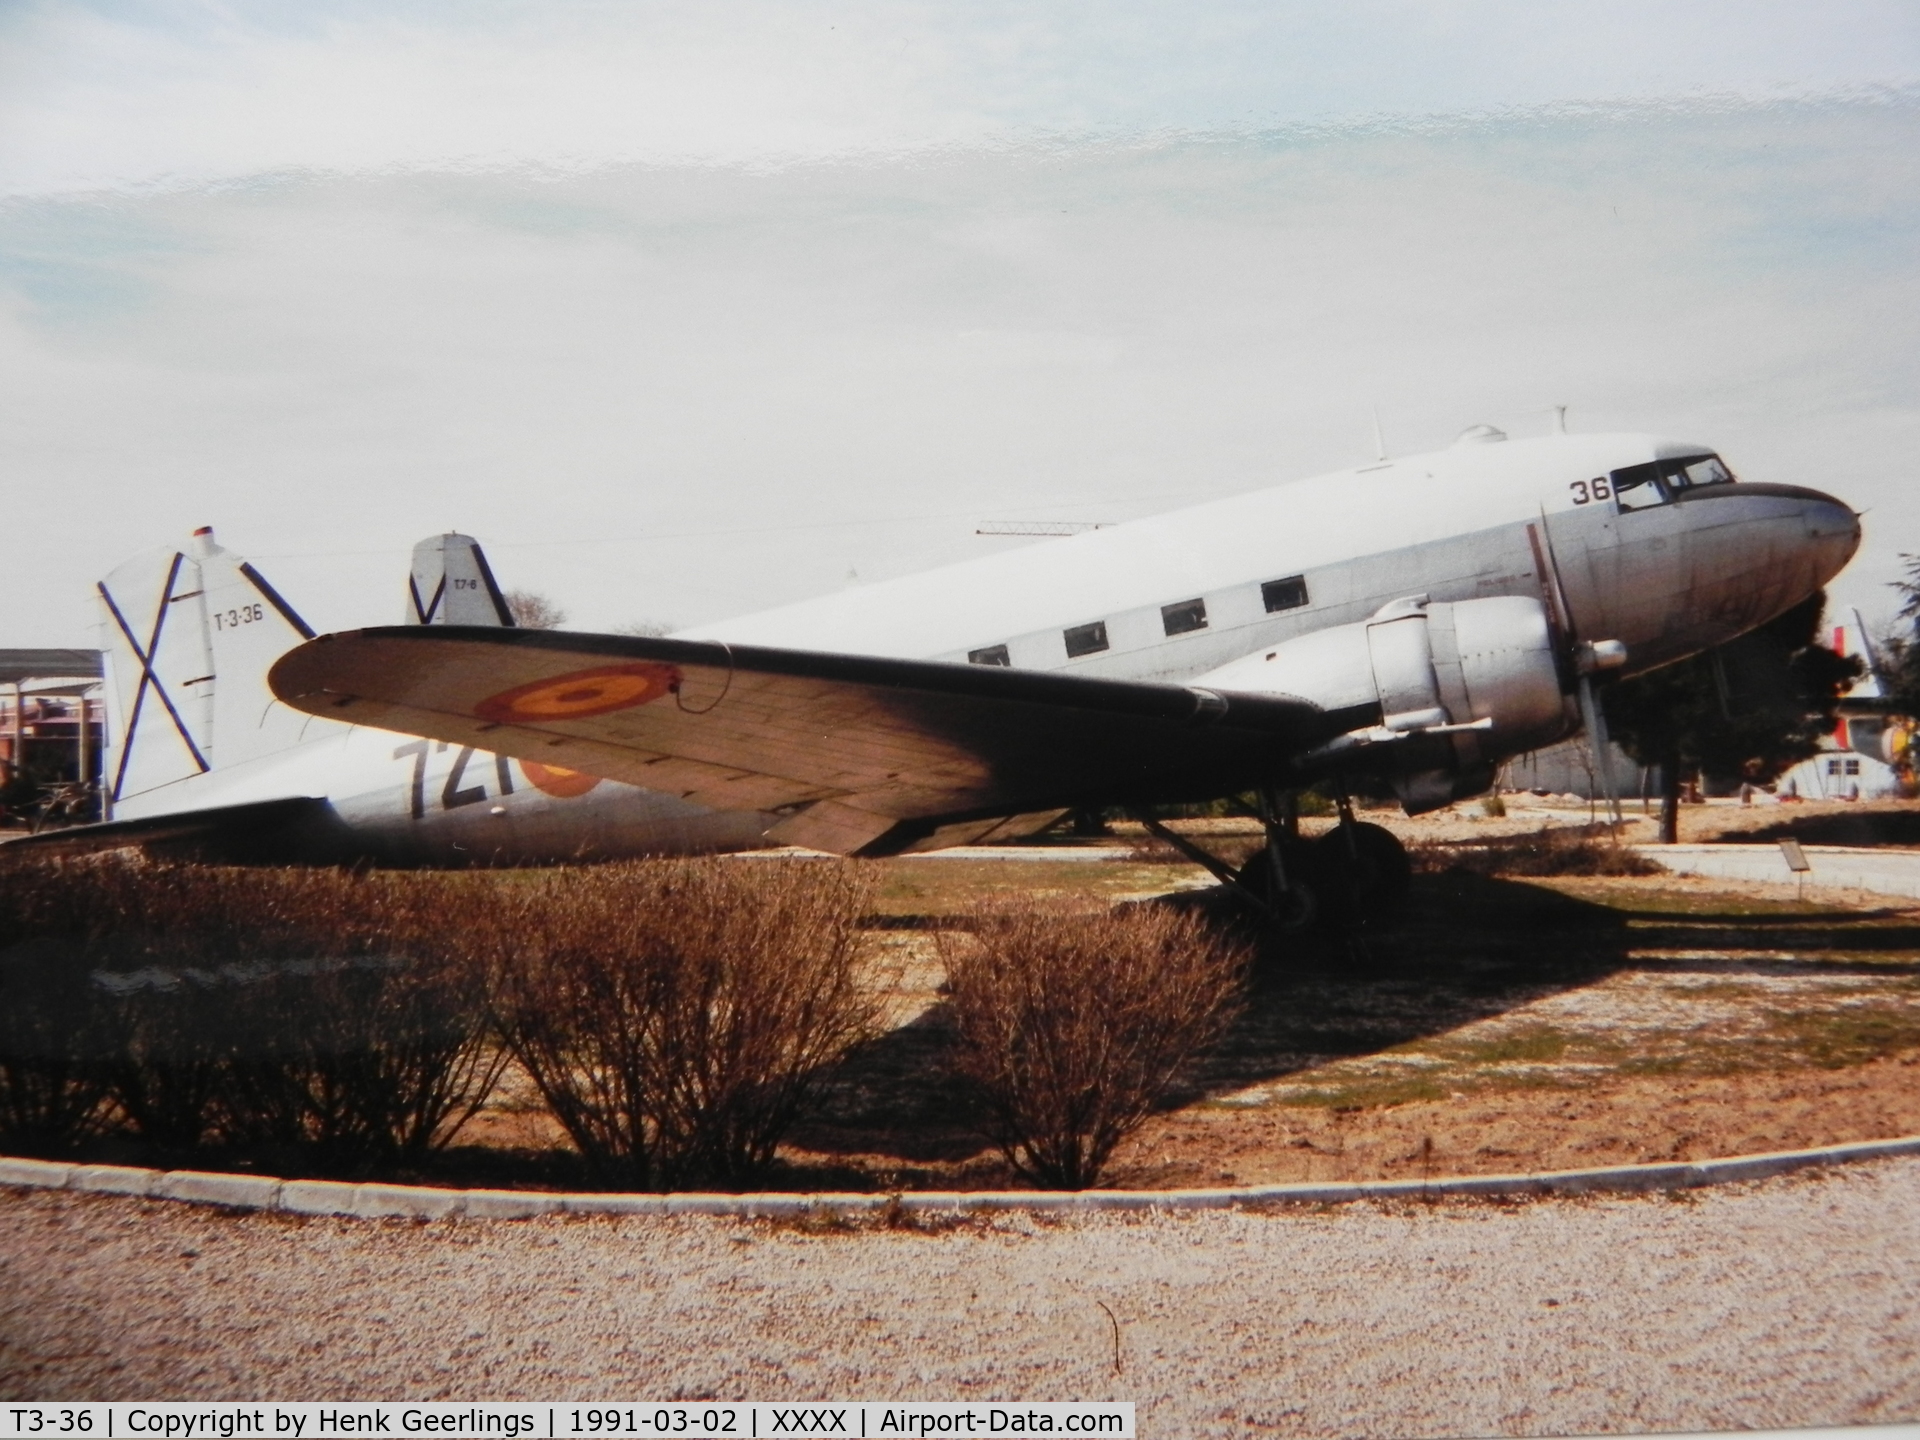 T3-36, Douglas C-47B Skytrain C/N 20600, Museo del Aire, Cuatro Vientos , Madrid.Scan from photo taken in 1991 Spanish Air Force